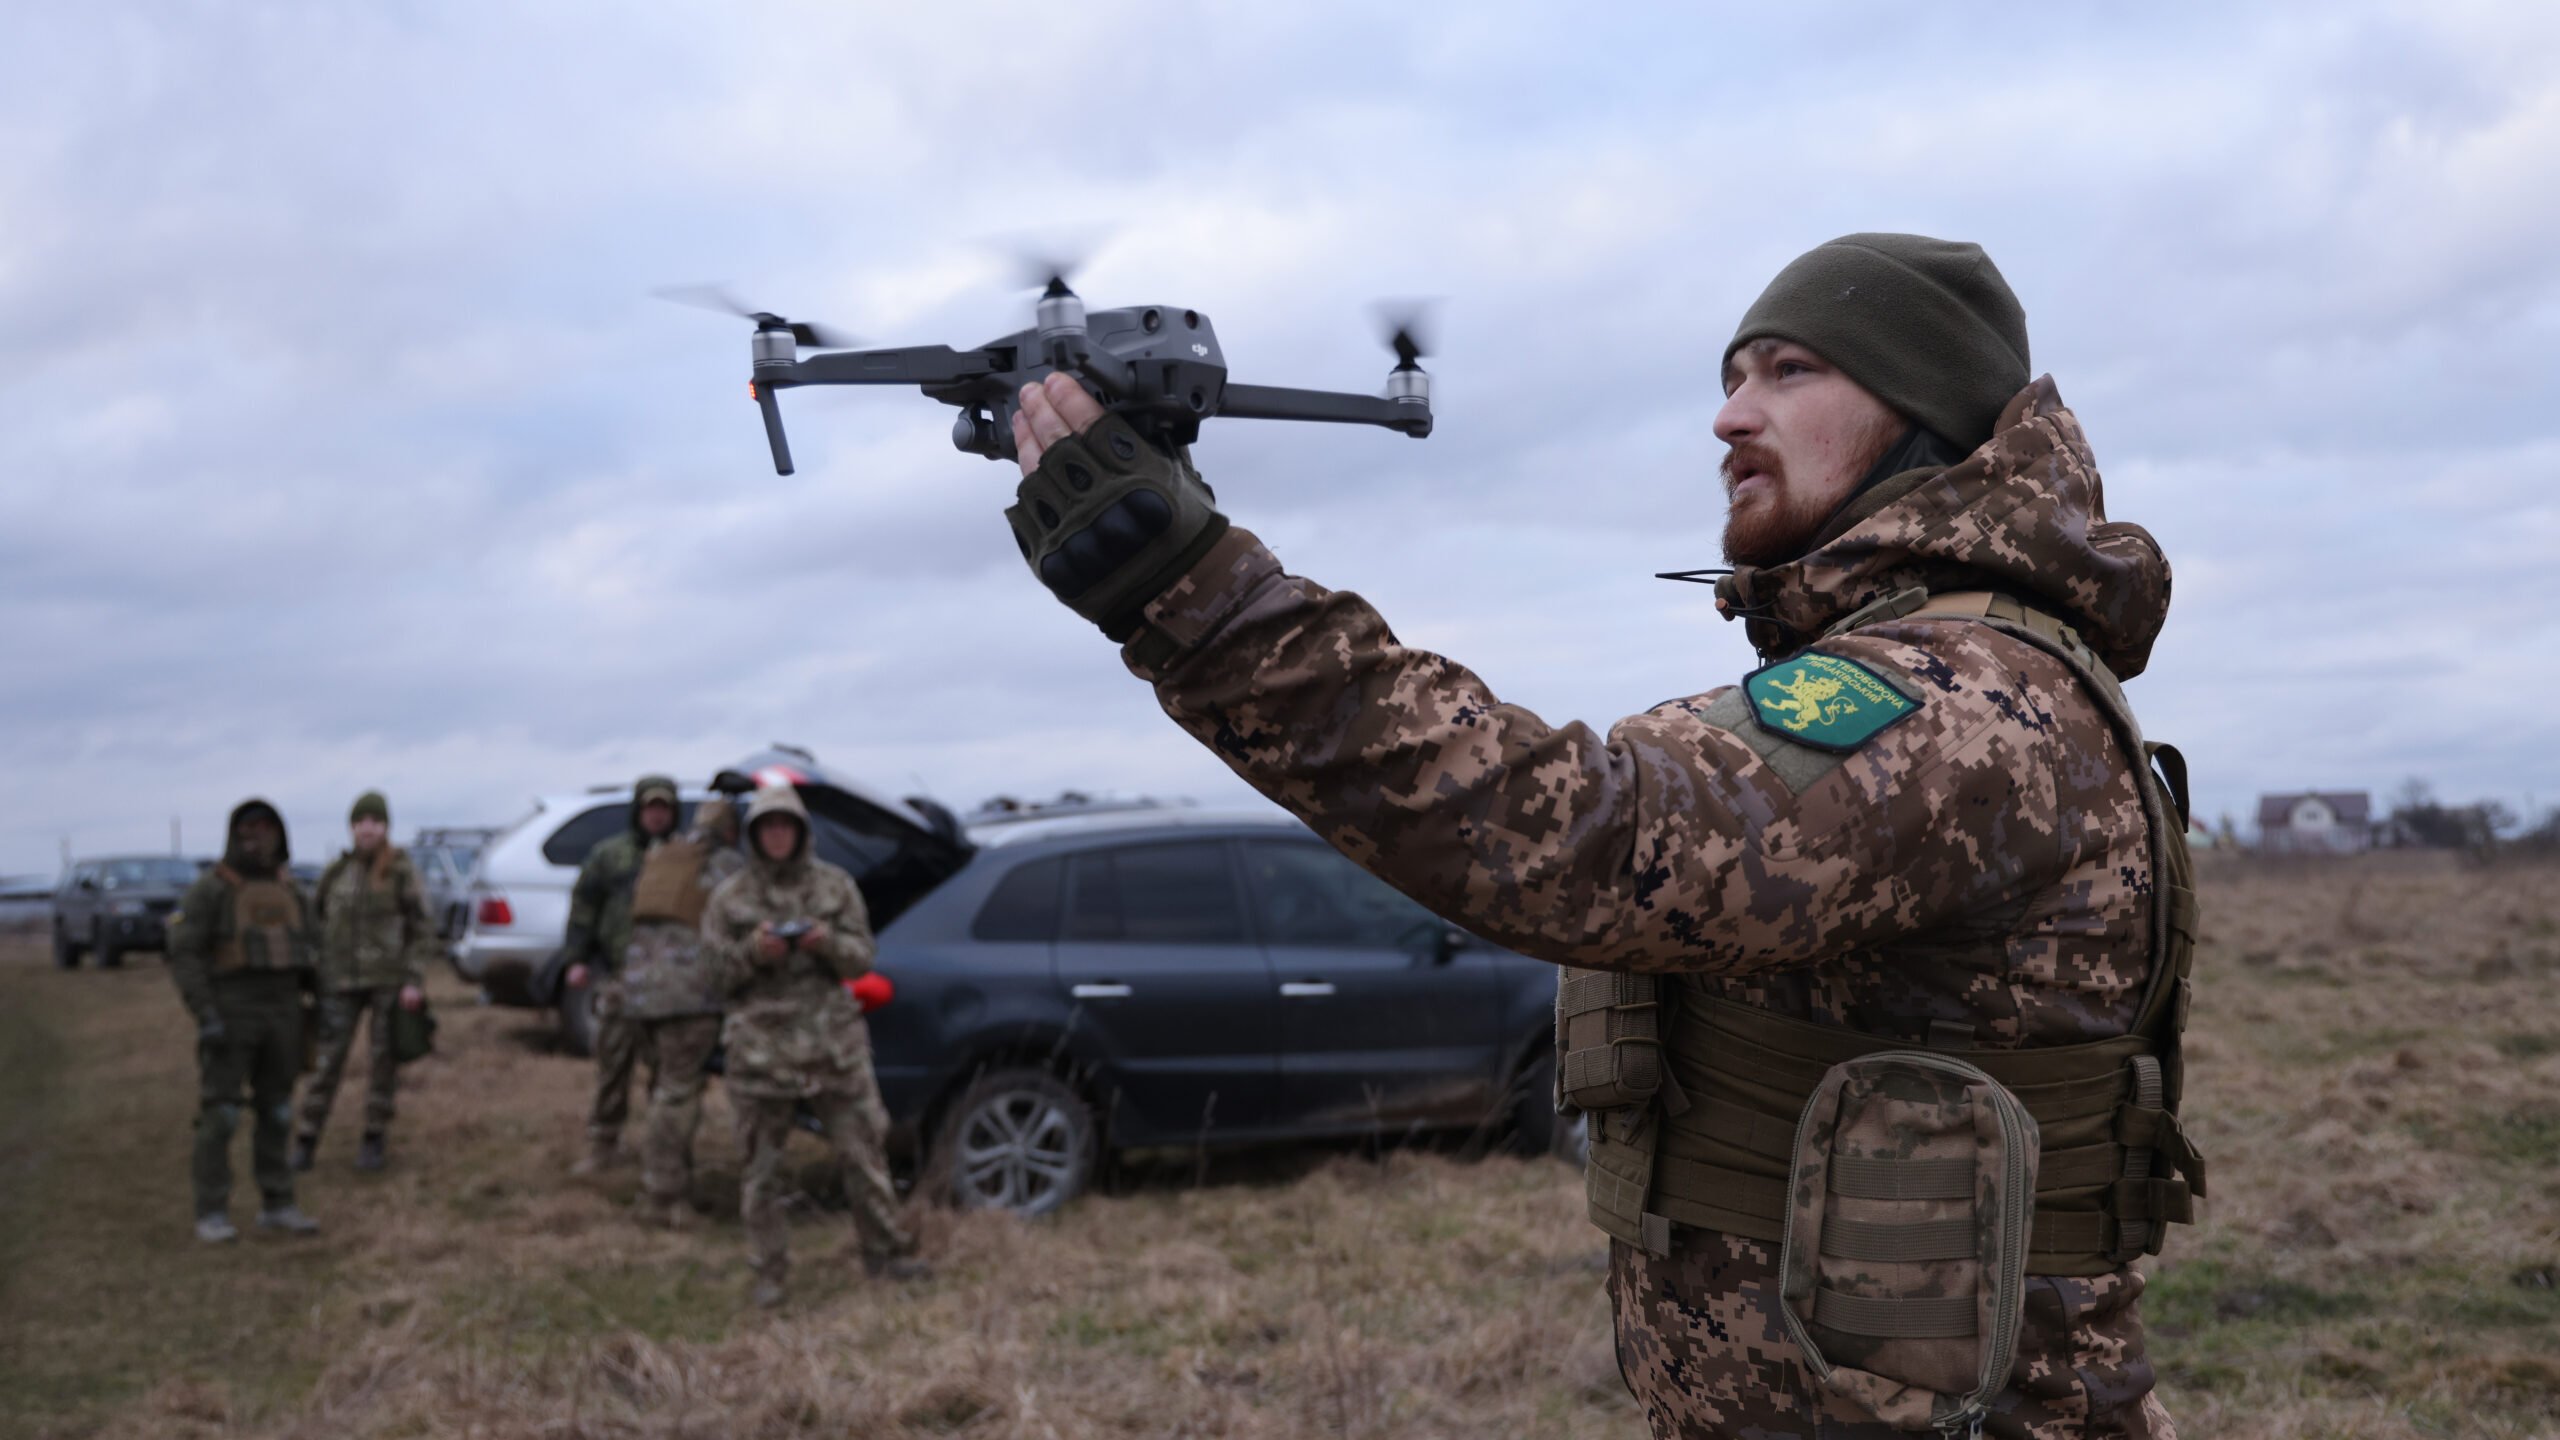 Dumb and cheap: When facing electronic warfare in Ukraine, small